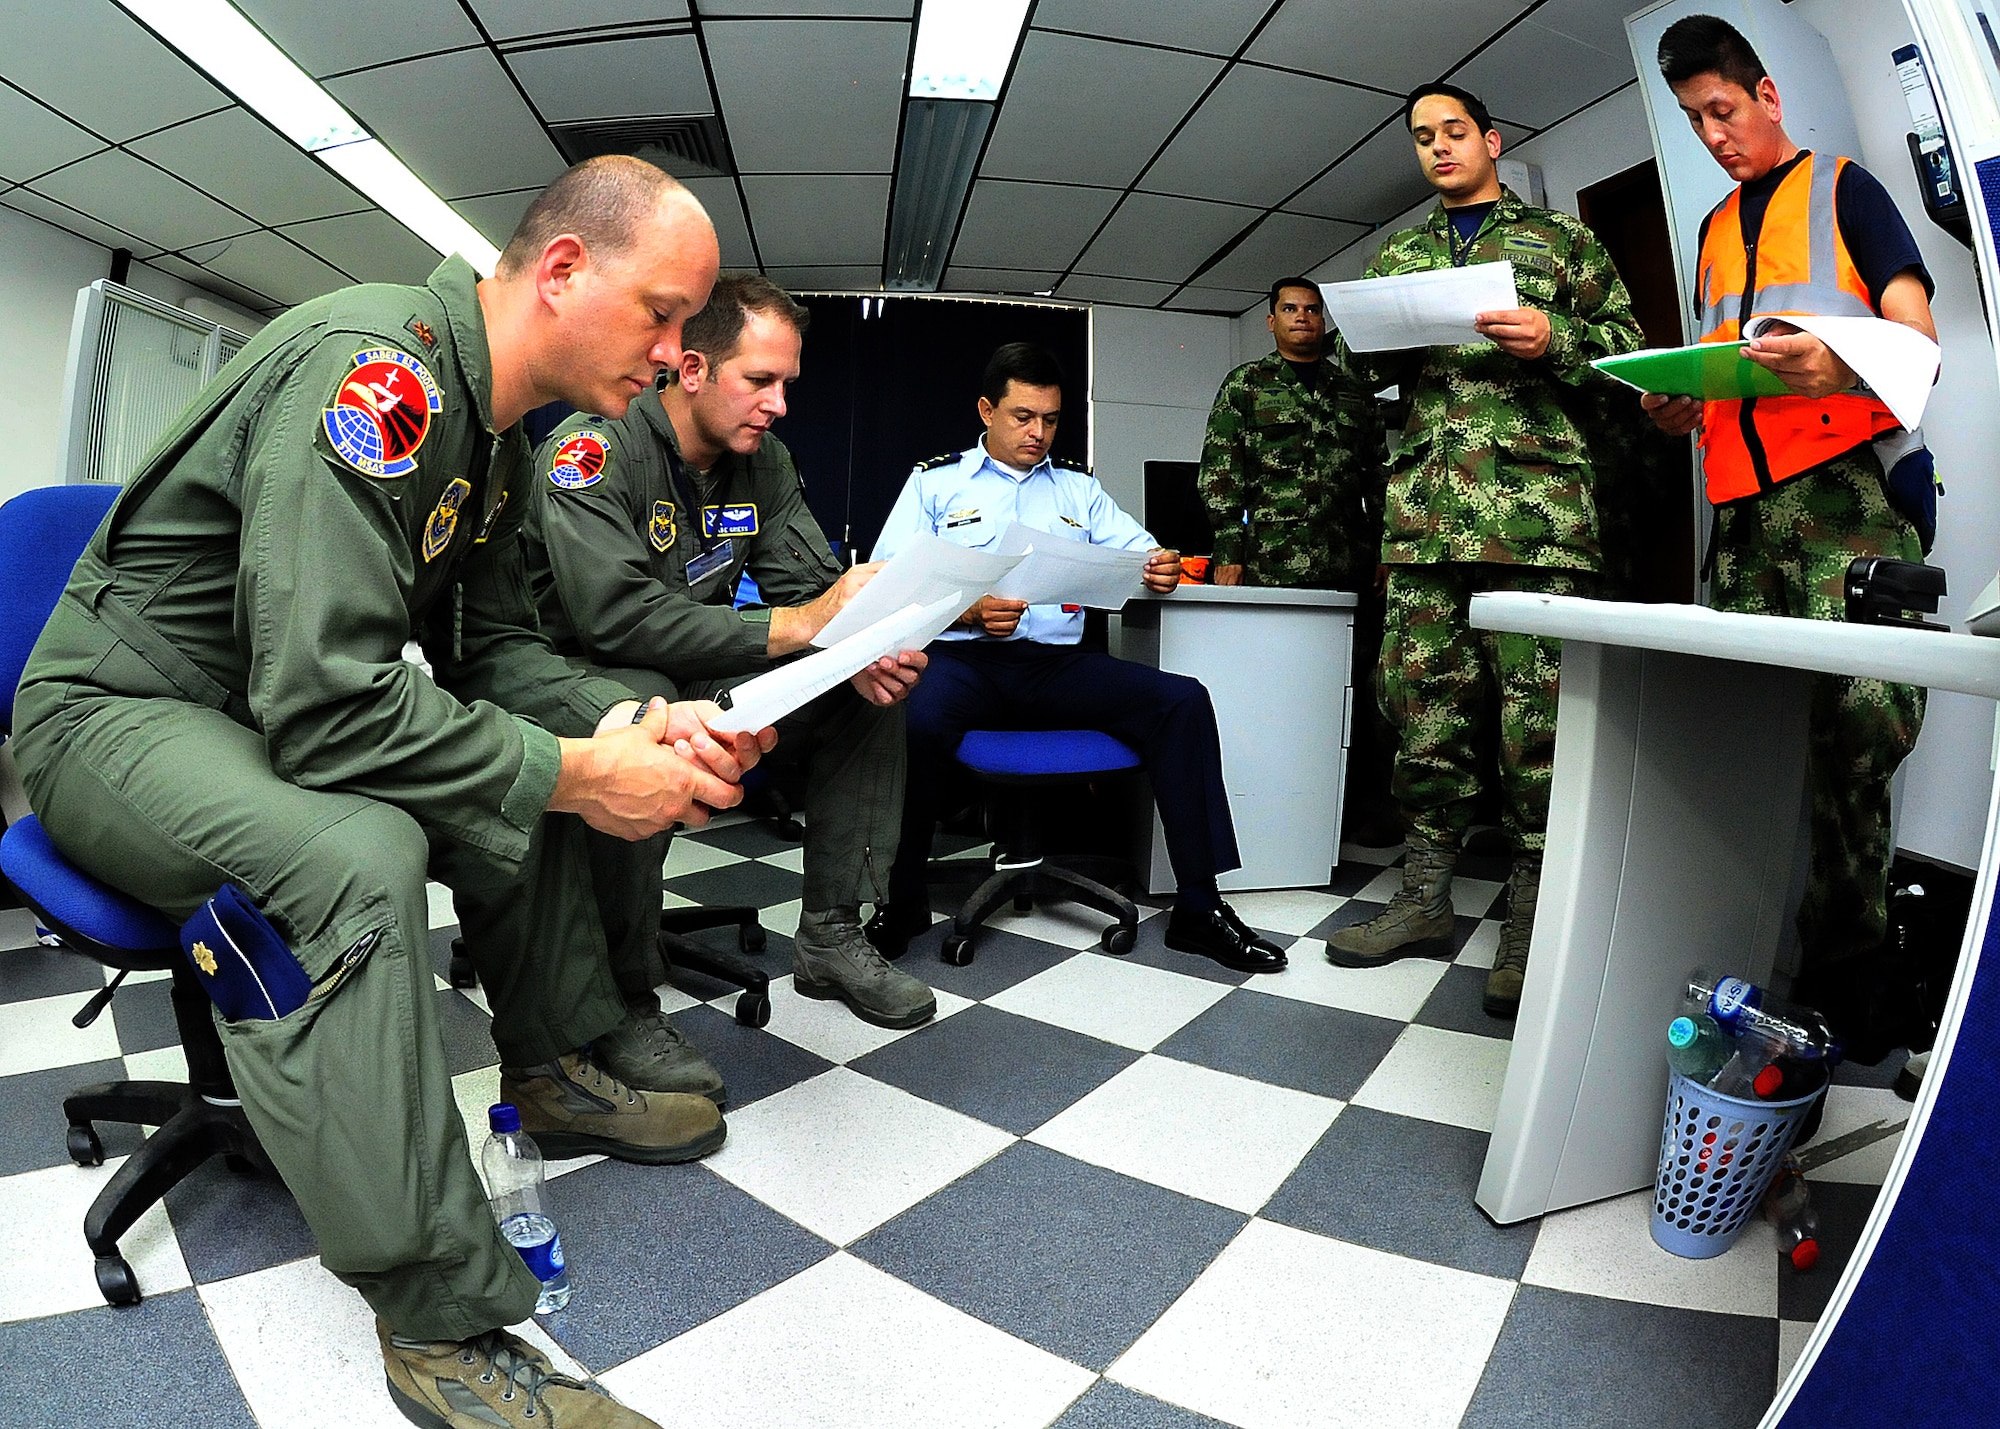 The production superintendent and a maintenance operations center member go over the evening's flight schedule with senior leadership during the MOC briefing June 15, at Comando Aéreo de Combate No. 1 base, Palanquero, Colombia, as part of a month-long Air Mobility Command Building Partner Capacity mission. (U.S. Air Force photo by Tech. Sgt. Lesley Waters)